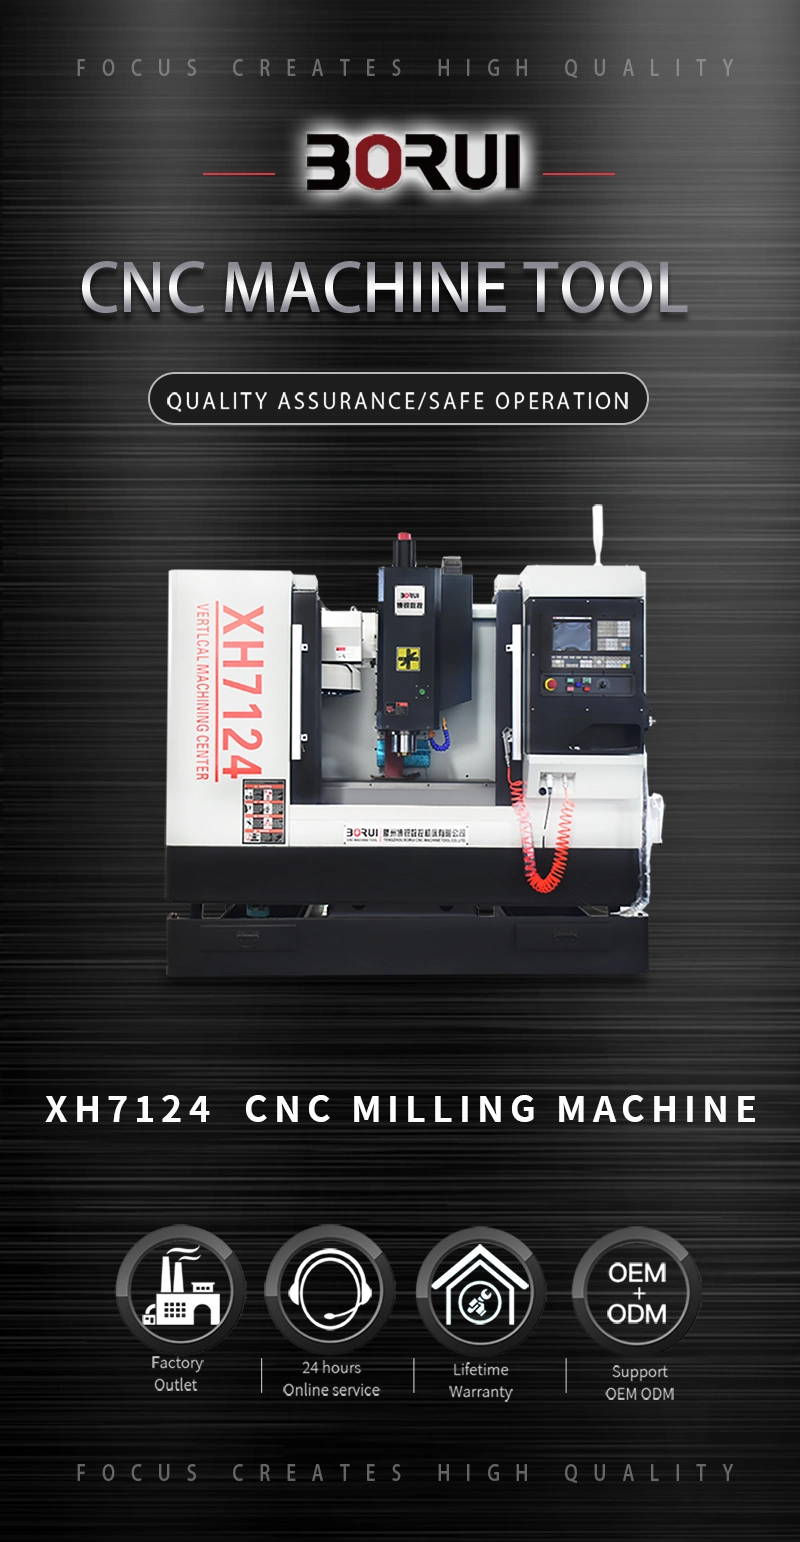 Xh7124 Siemens System 3-Axis 4-Axis CNC Vertical Machining Center